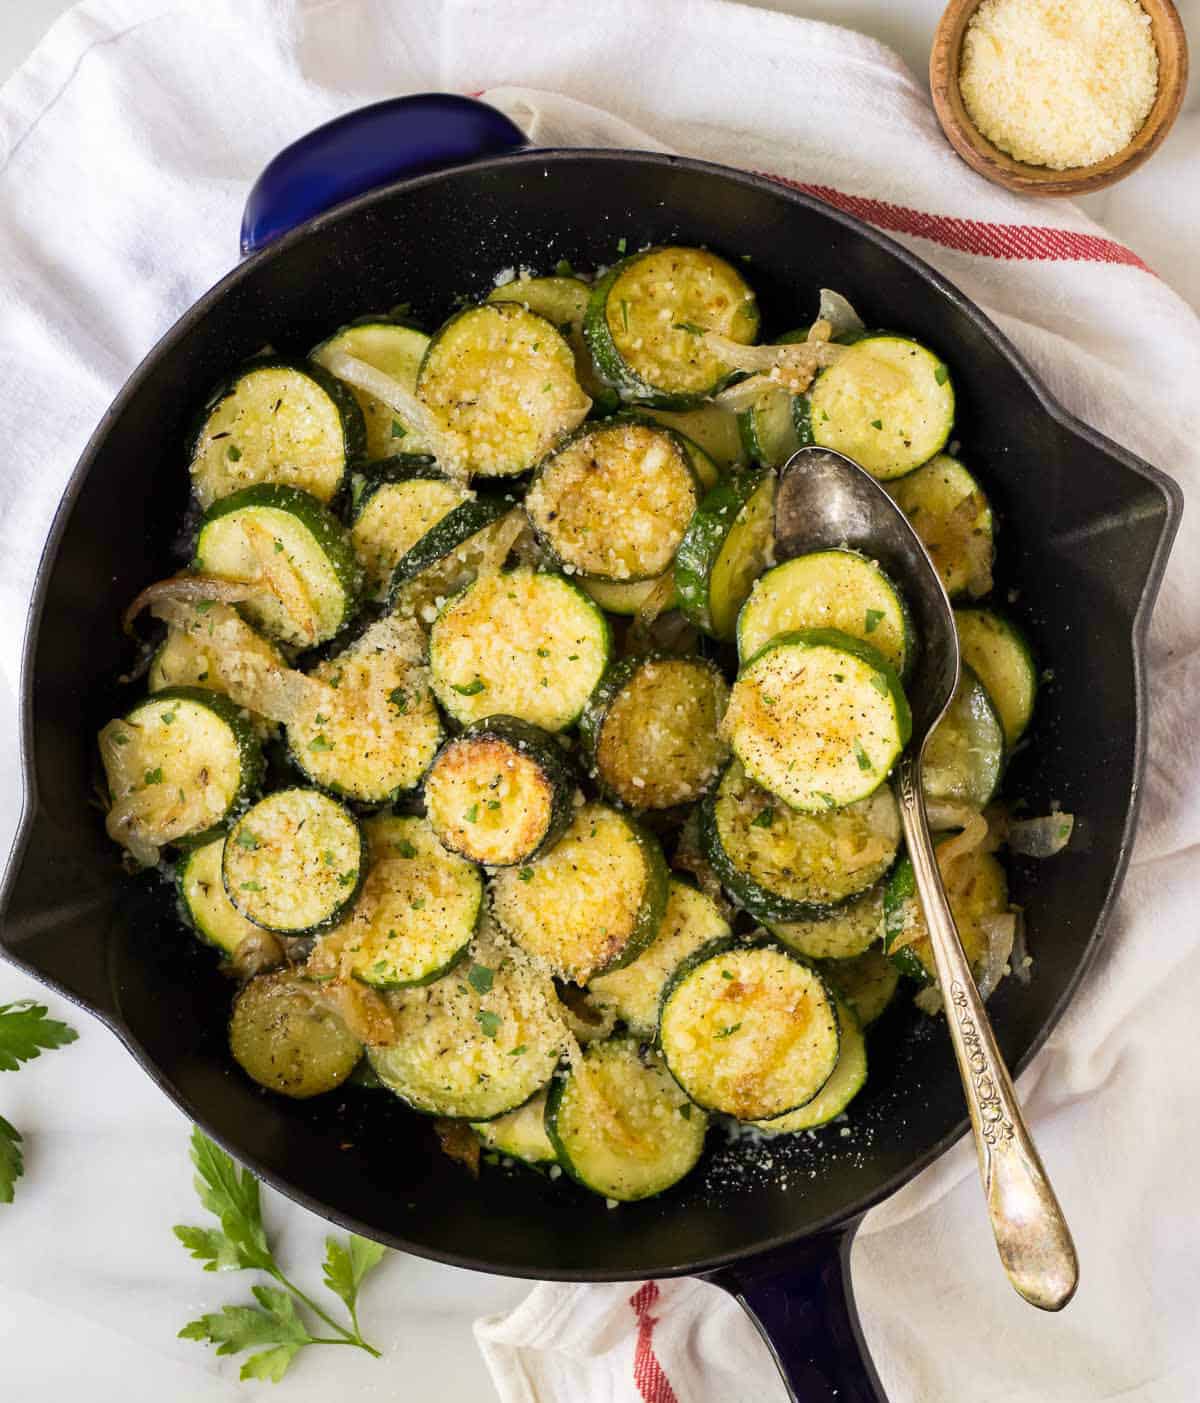 Delicious Italian Zucchini Saute With Parmesan - A Flavorful And Easy Dish To Make